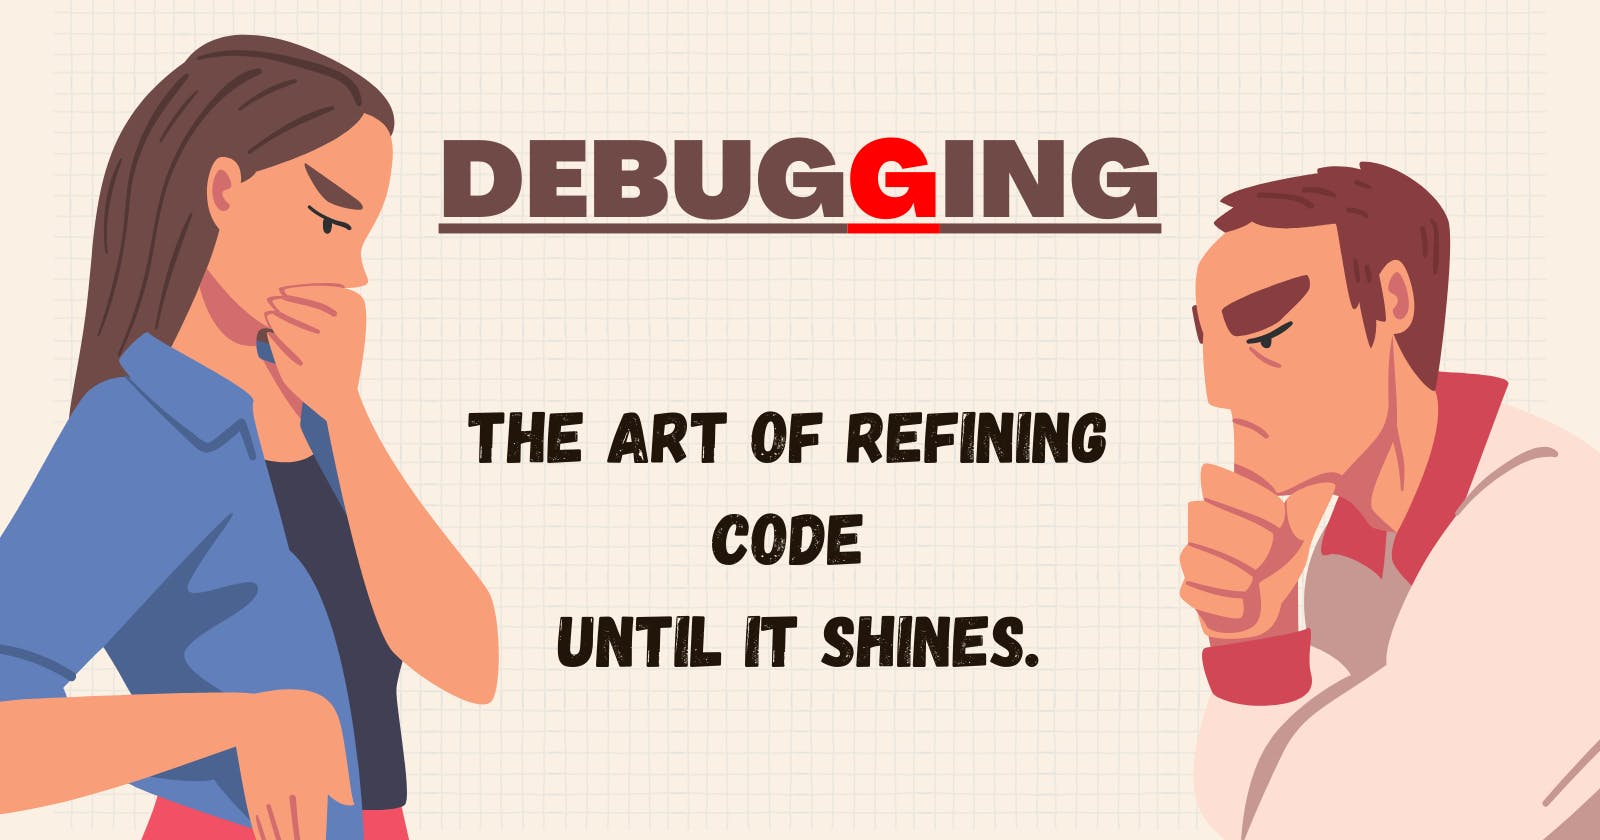 Debugging: The Art of Refining Code until it Shines